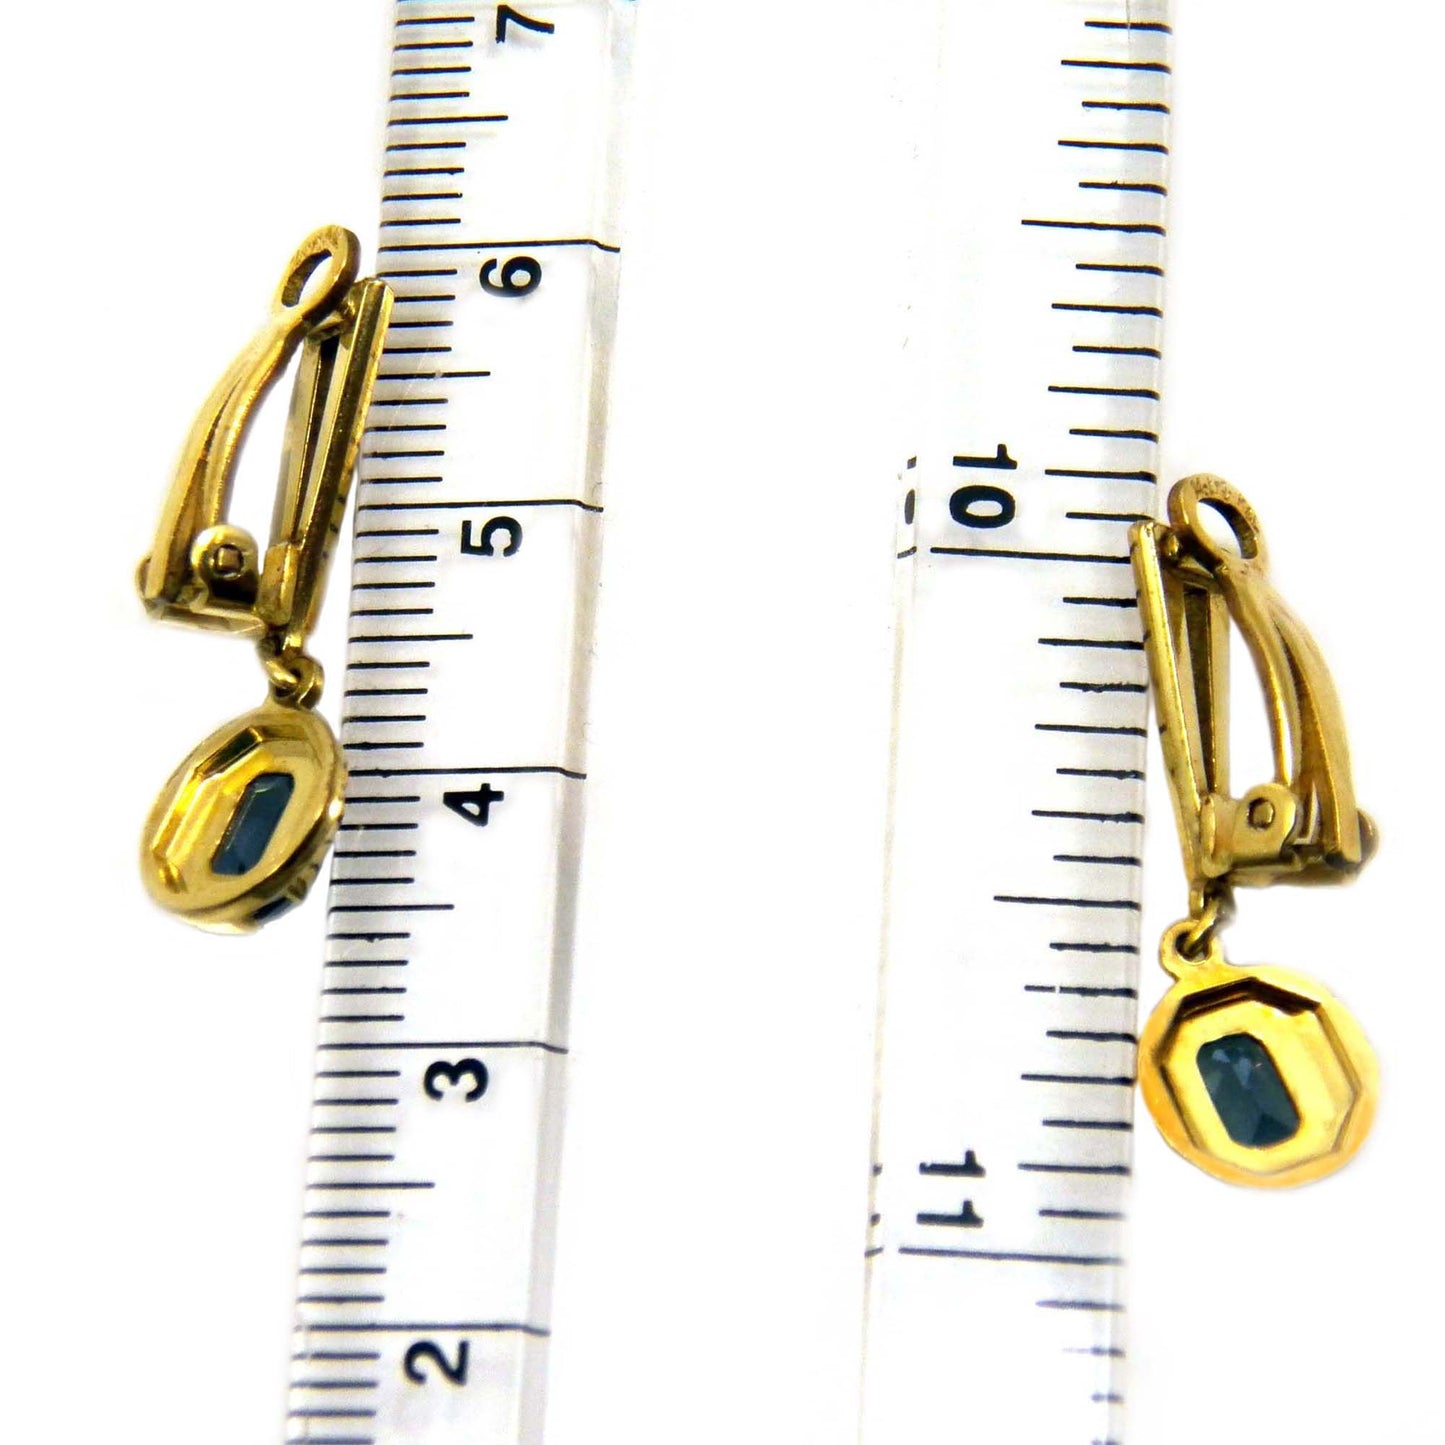 14k Rolled Gold Clip on Earrings by Kordes and Lichtenfels, K&L Germany Vintage Jewelry